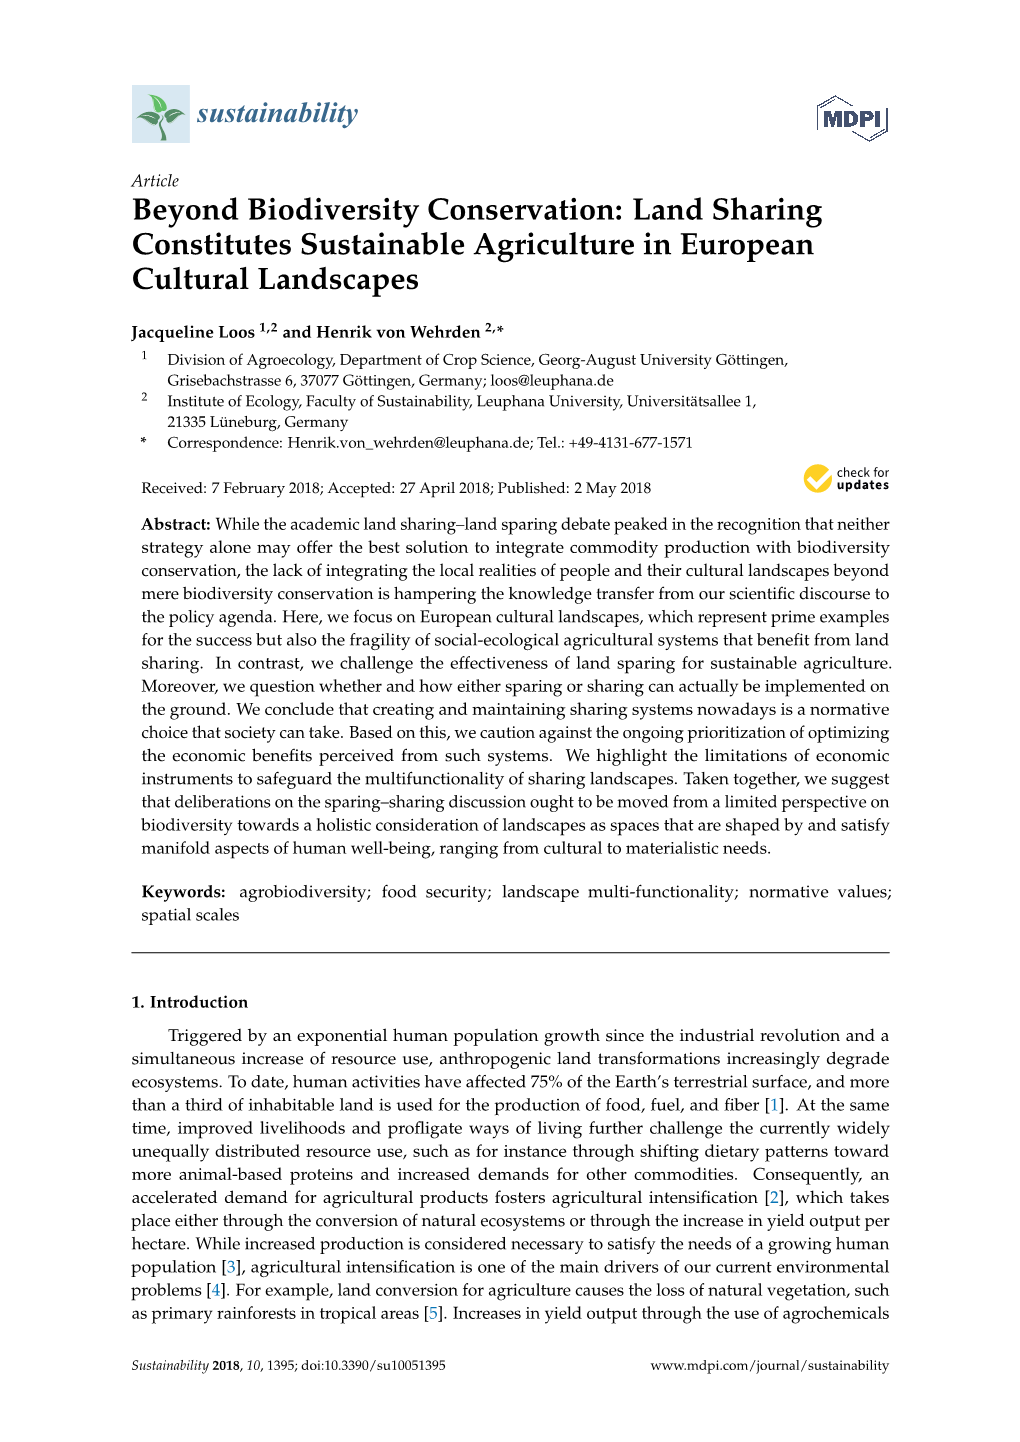 Land Sharing Constitutes Sustainable Agriculture in European Cultural Landscapes